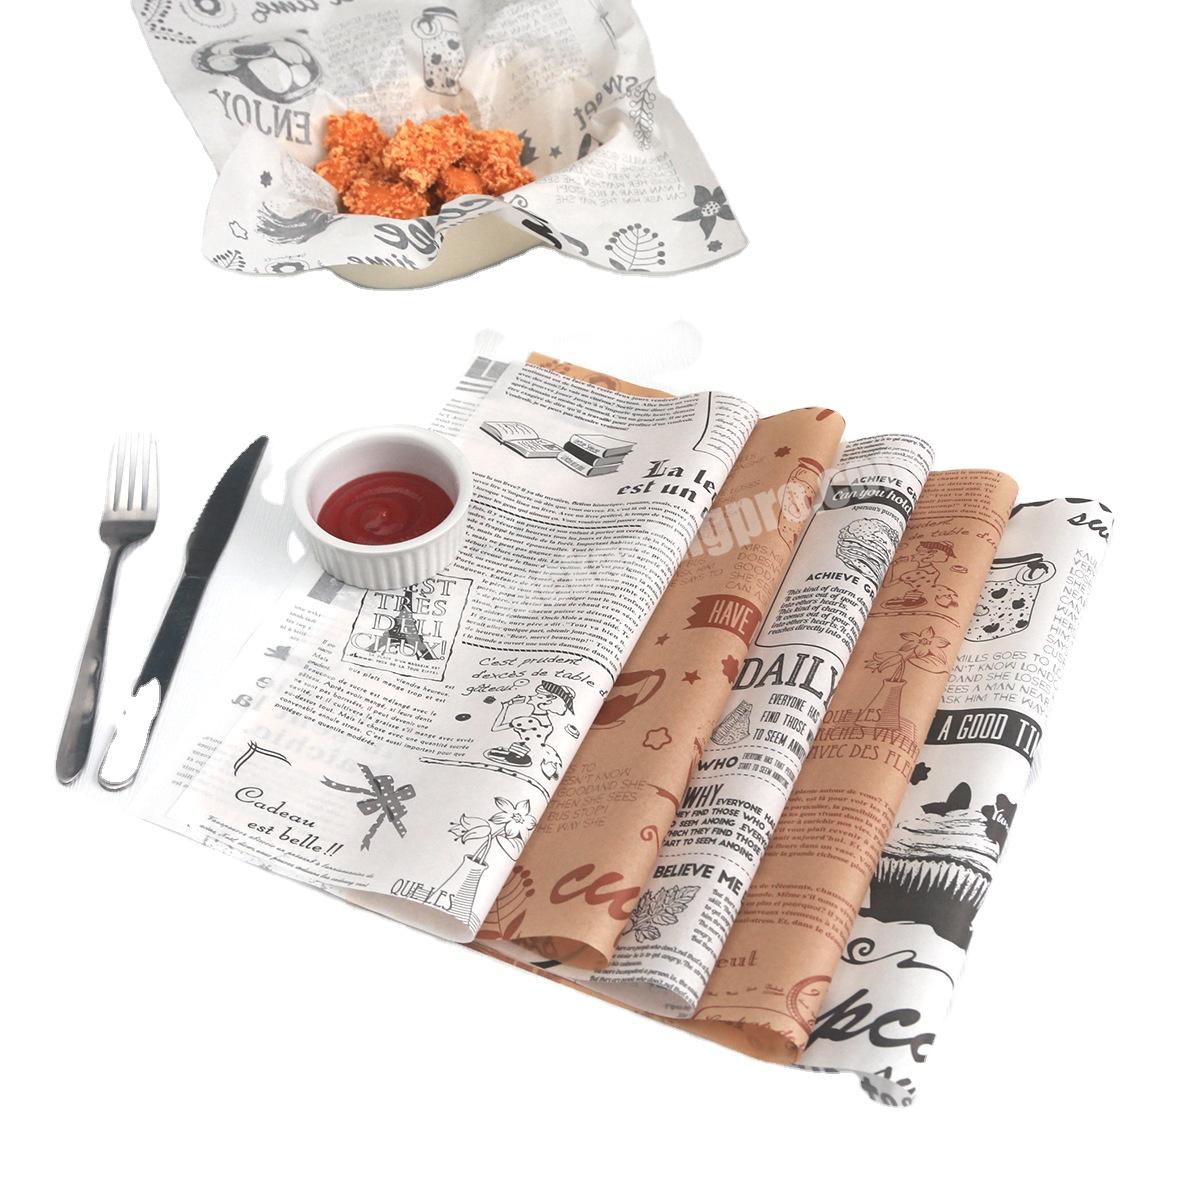 Custom Patterned Wax Wrapping Paper For Food Greaseproof Hamburger Sandwich Meat Wrapping Paper